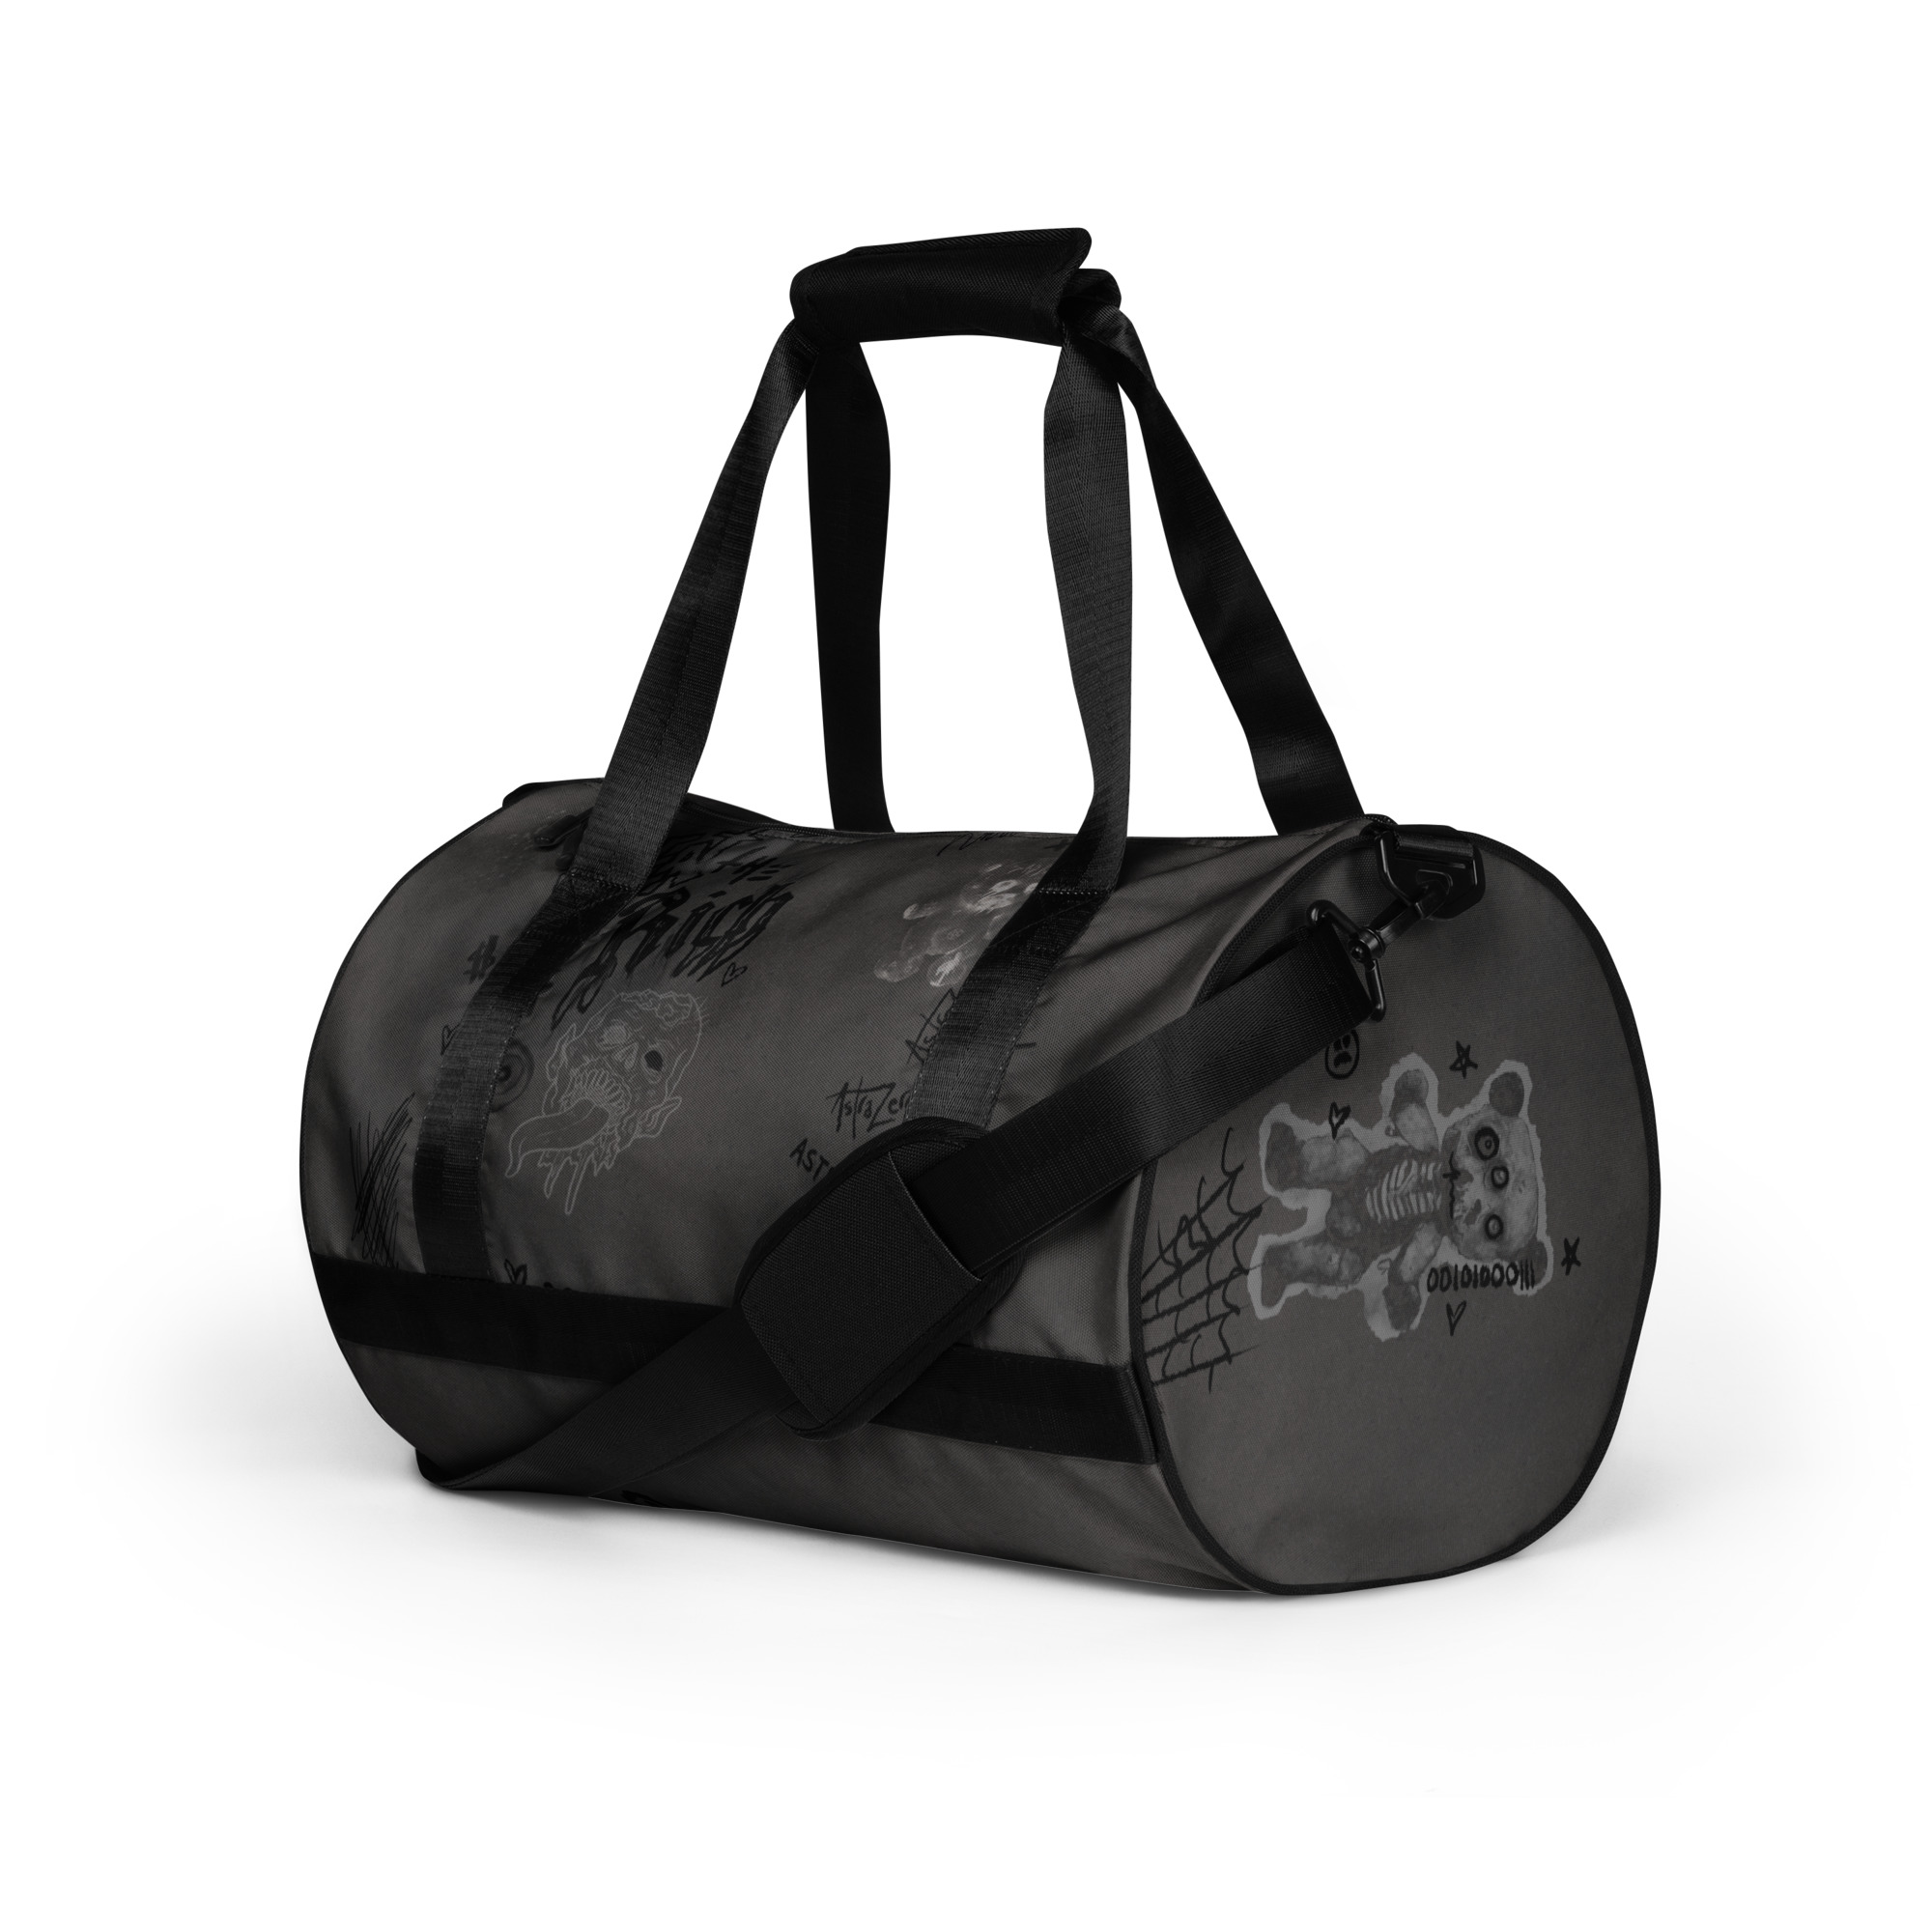 Featured image for “Eat the Rich - Zombie Bear - Gym bag”